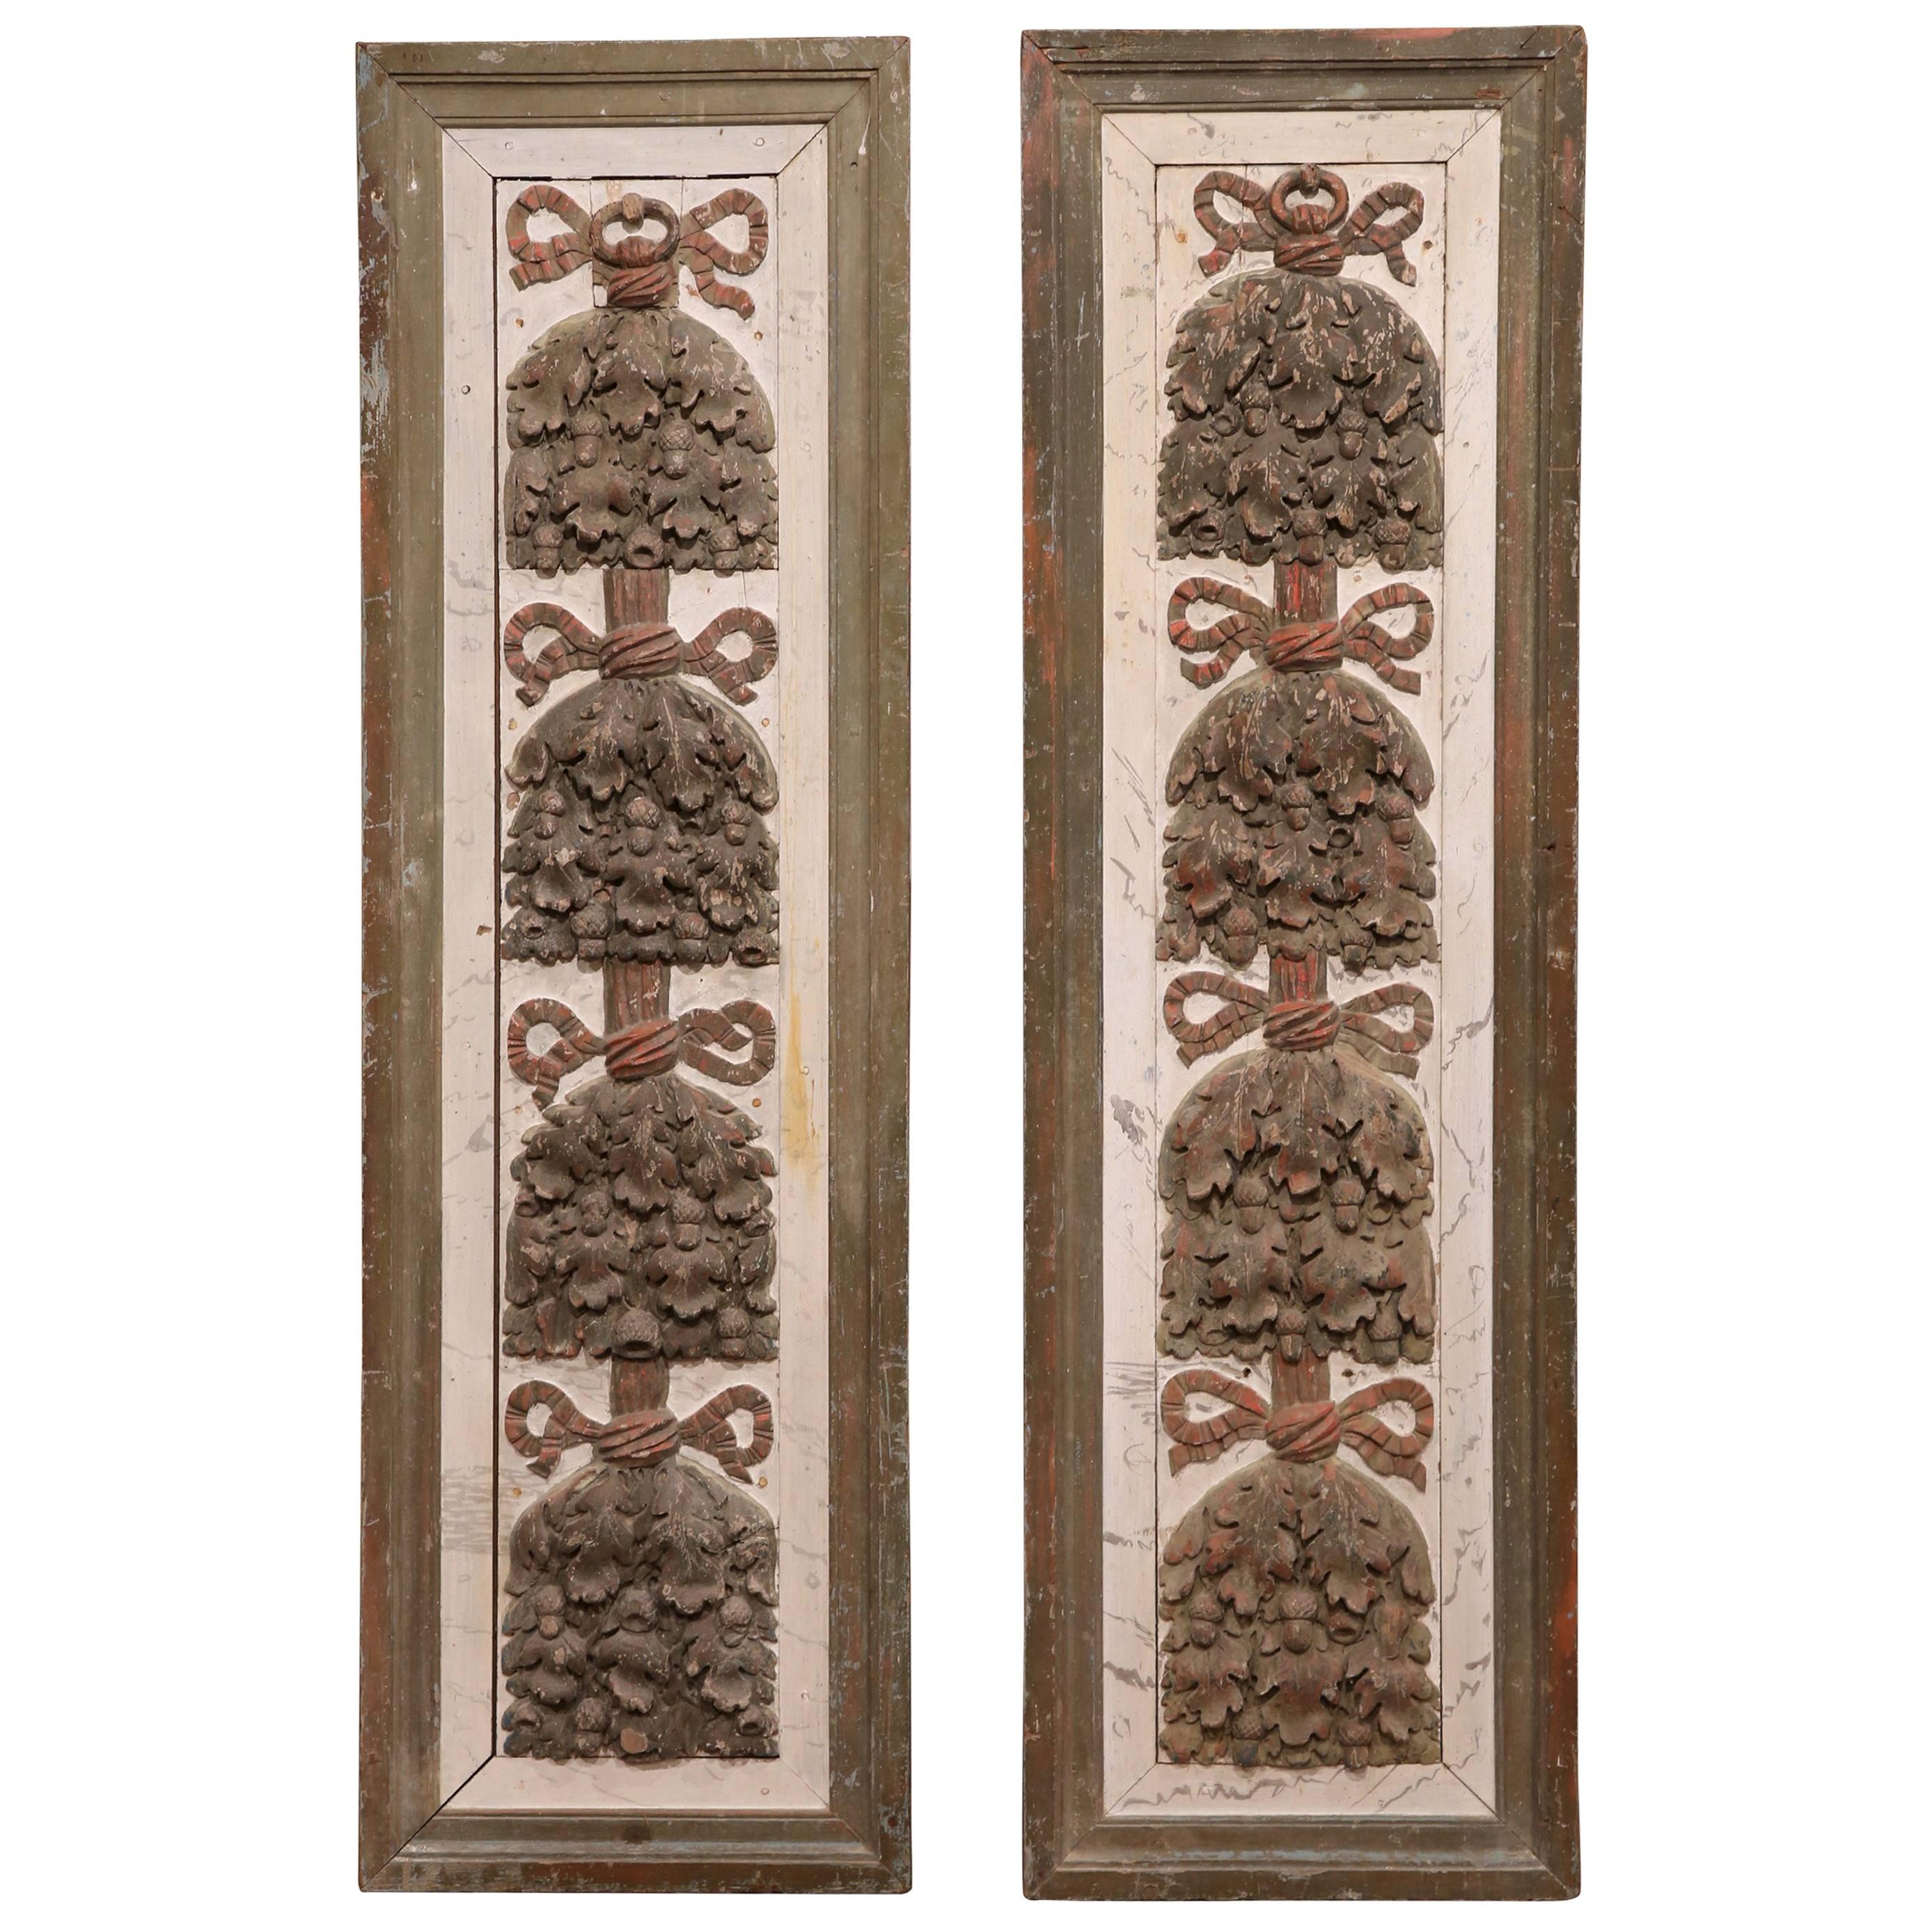 Pair of 18th Century French Carved Hand-Painted Wall Panels from Versailles